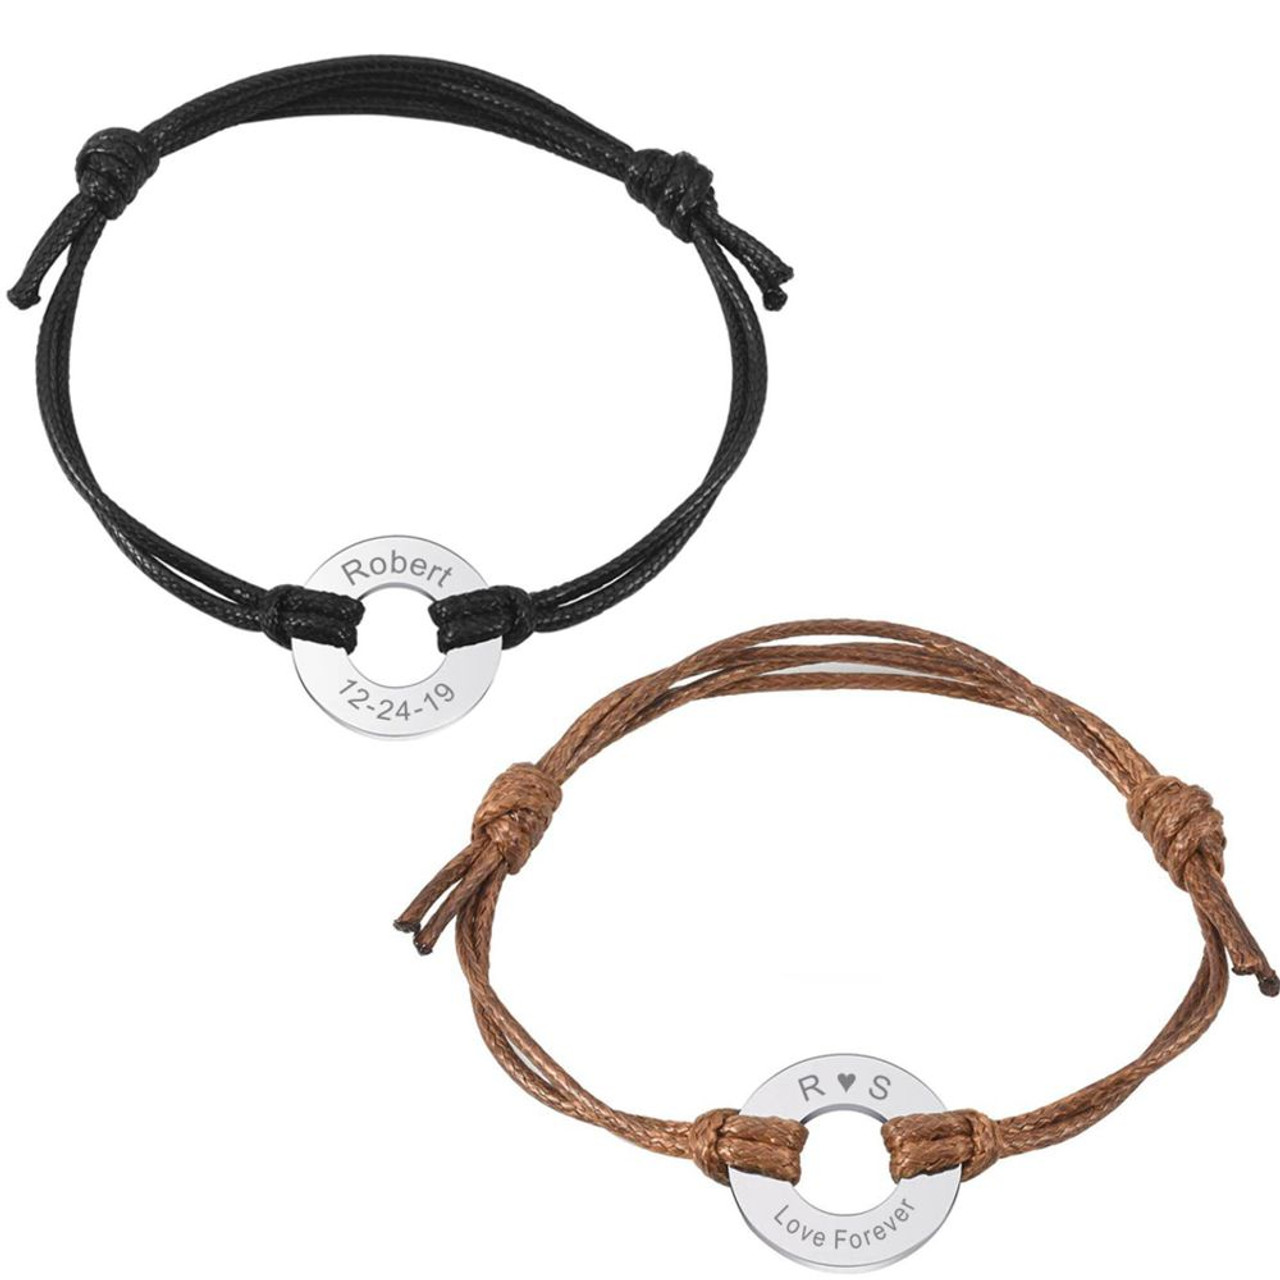 Shop High Quality Leather Rope Bracelets Personalized Gift Item